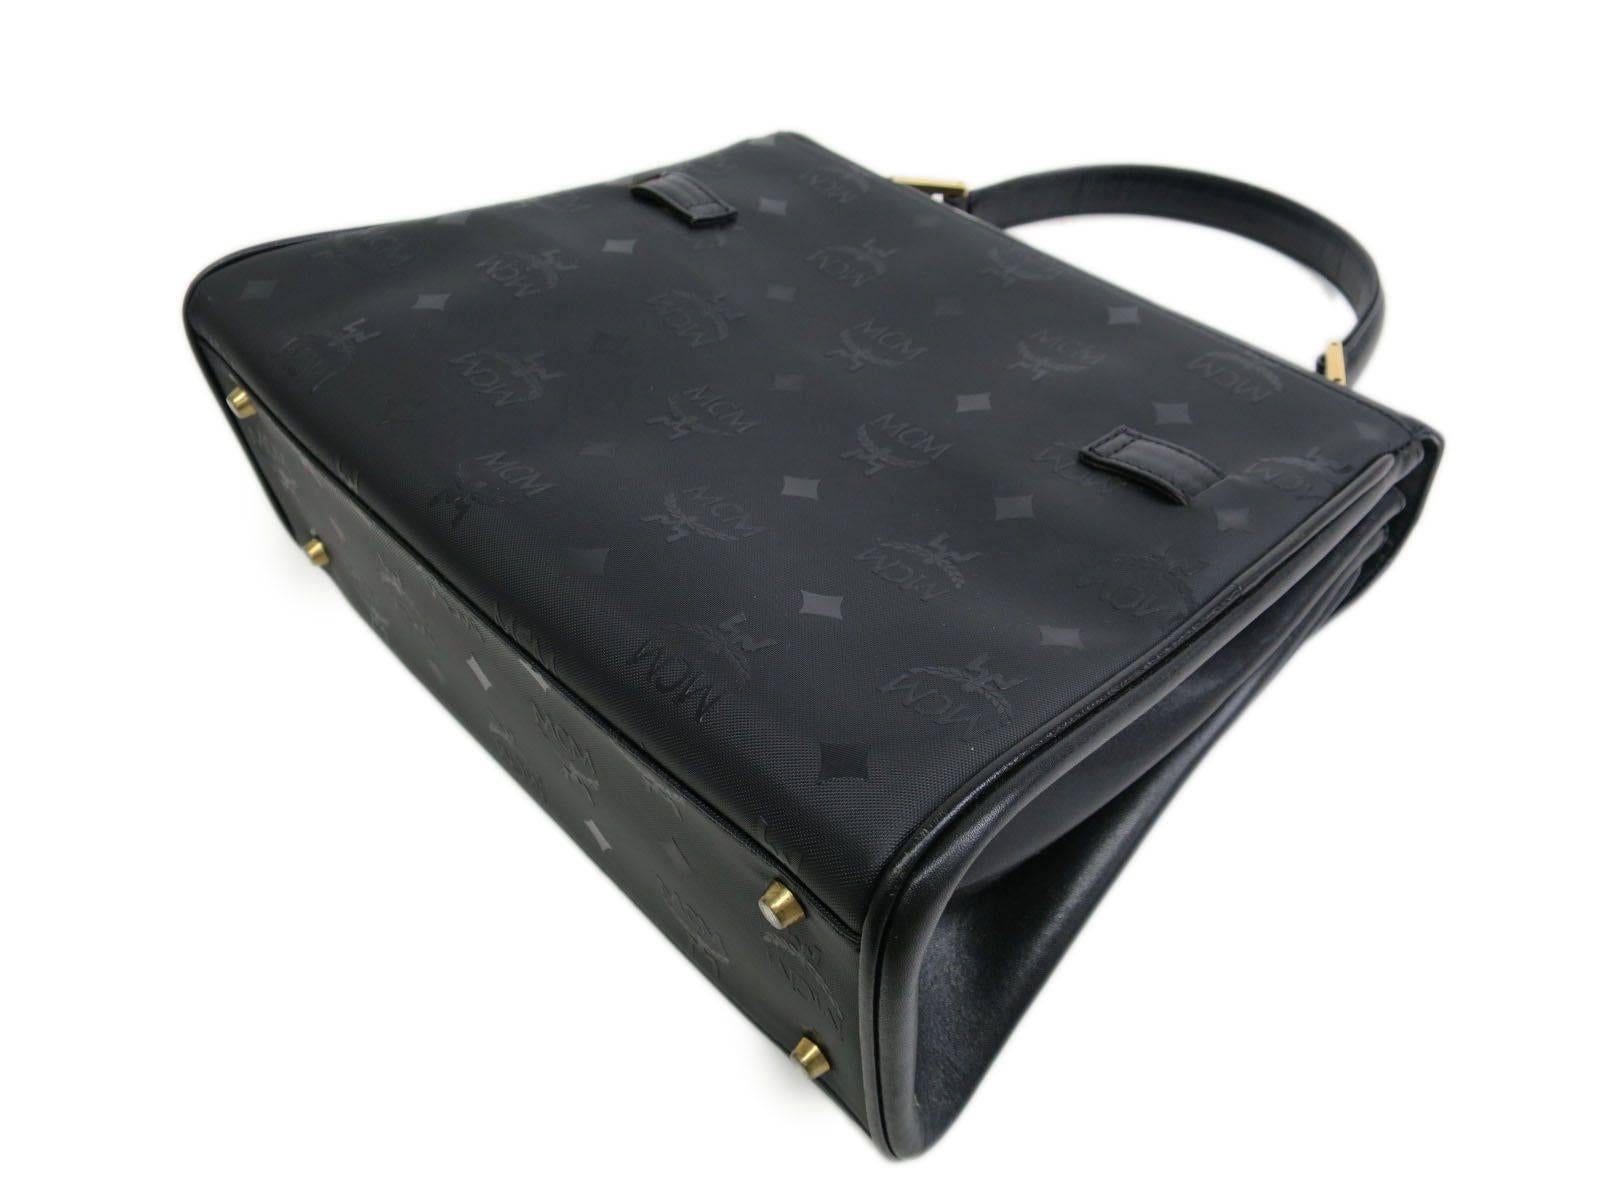 CURATOR'S NOTES

This isn't your mother's Kelly bag.  Timeless and classic MCM black vinyl logo Kelly-style box satchel bag featuring gold hardware and turn lock closure. Substantial in size.  A well preserved and beautiful gem.

Vinyl
Gold